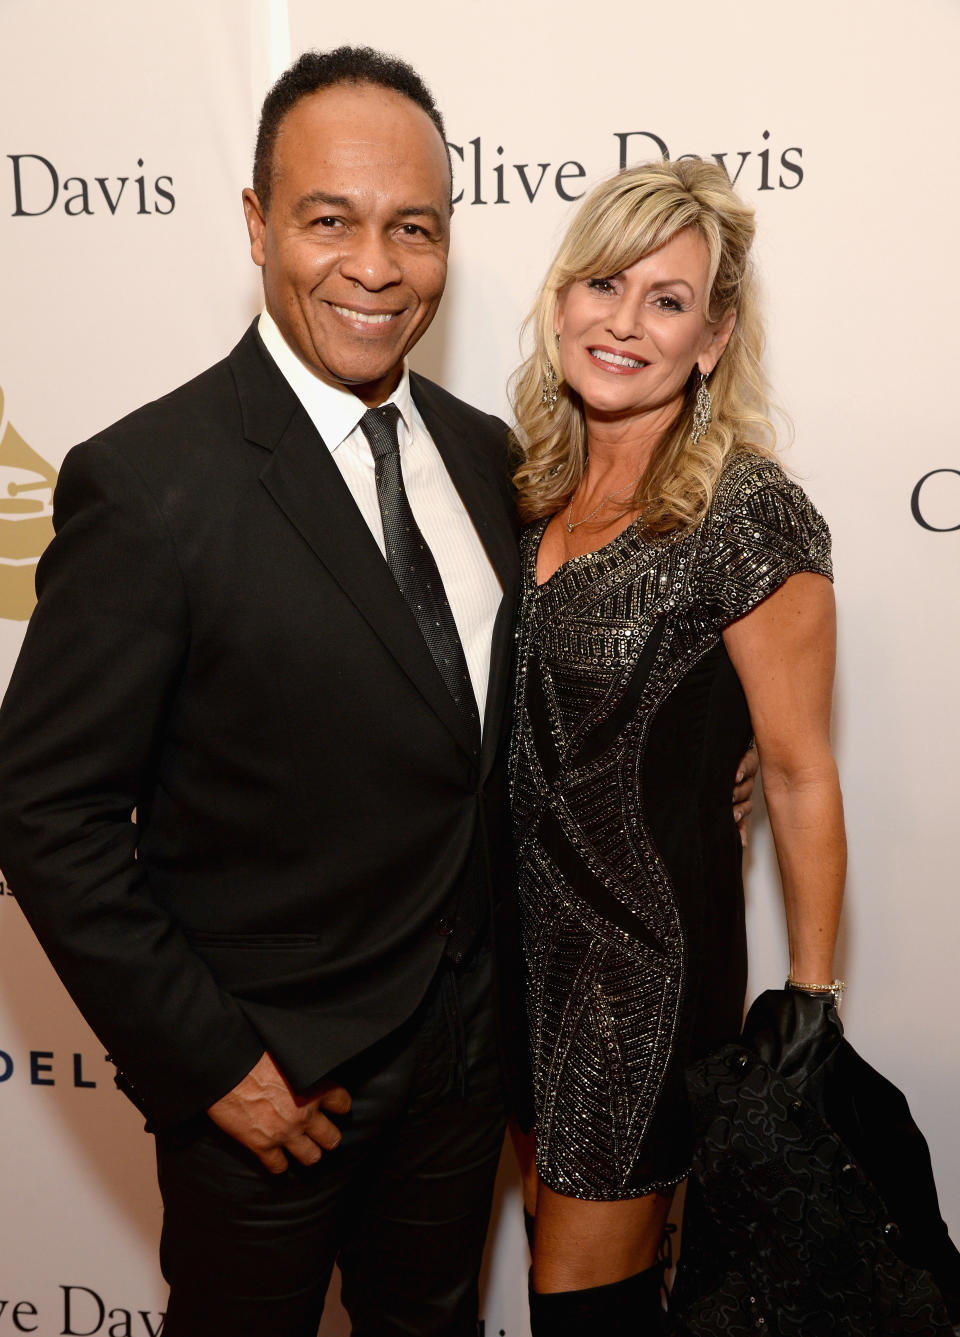 LOS ANGELES, CA - FEBRUARY 11:  Recording artist Ray Parker Jr. (L) and Elaine Parker attend Pre-GRAMMY Gala and Salute to Industry Icons Honoring Debra Lee at The Beverly Hilton on February 11, 2017 in Los Angeles, California.  (Photo by Michael Kovac/WireImage)